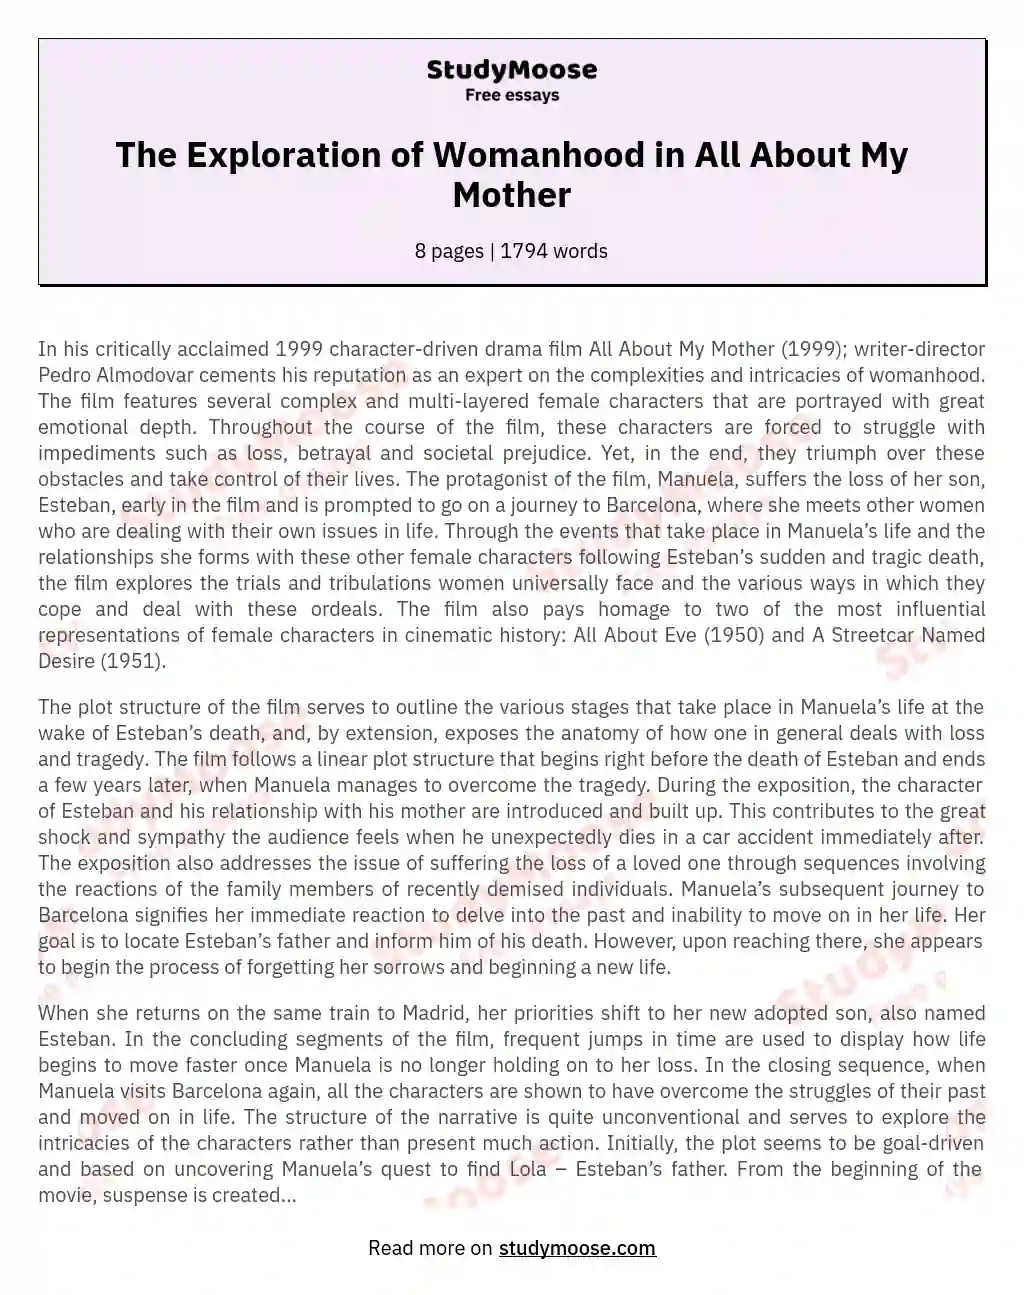 The Exploration of Womanhood in All About My Mother essay